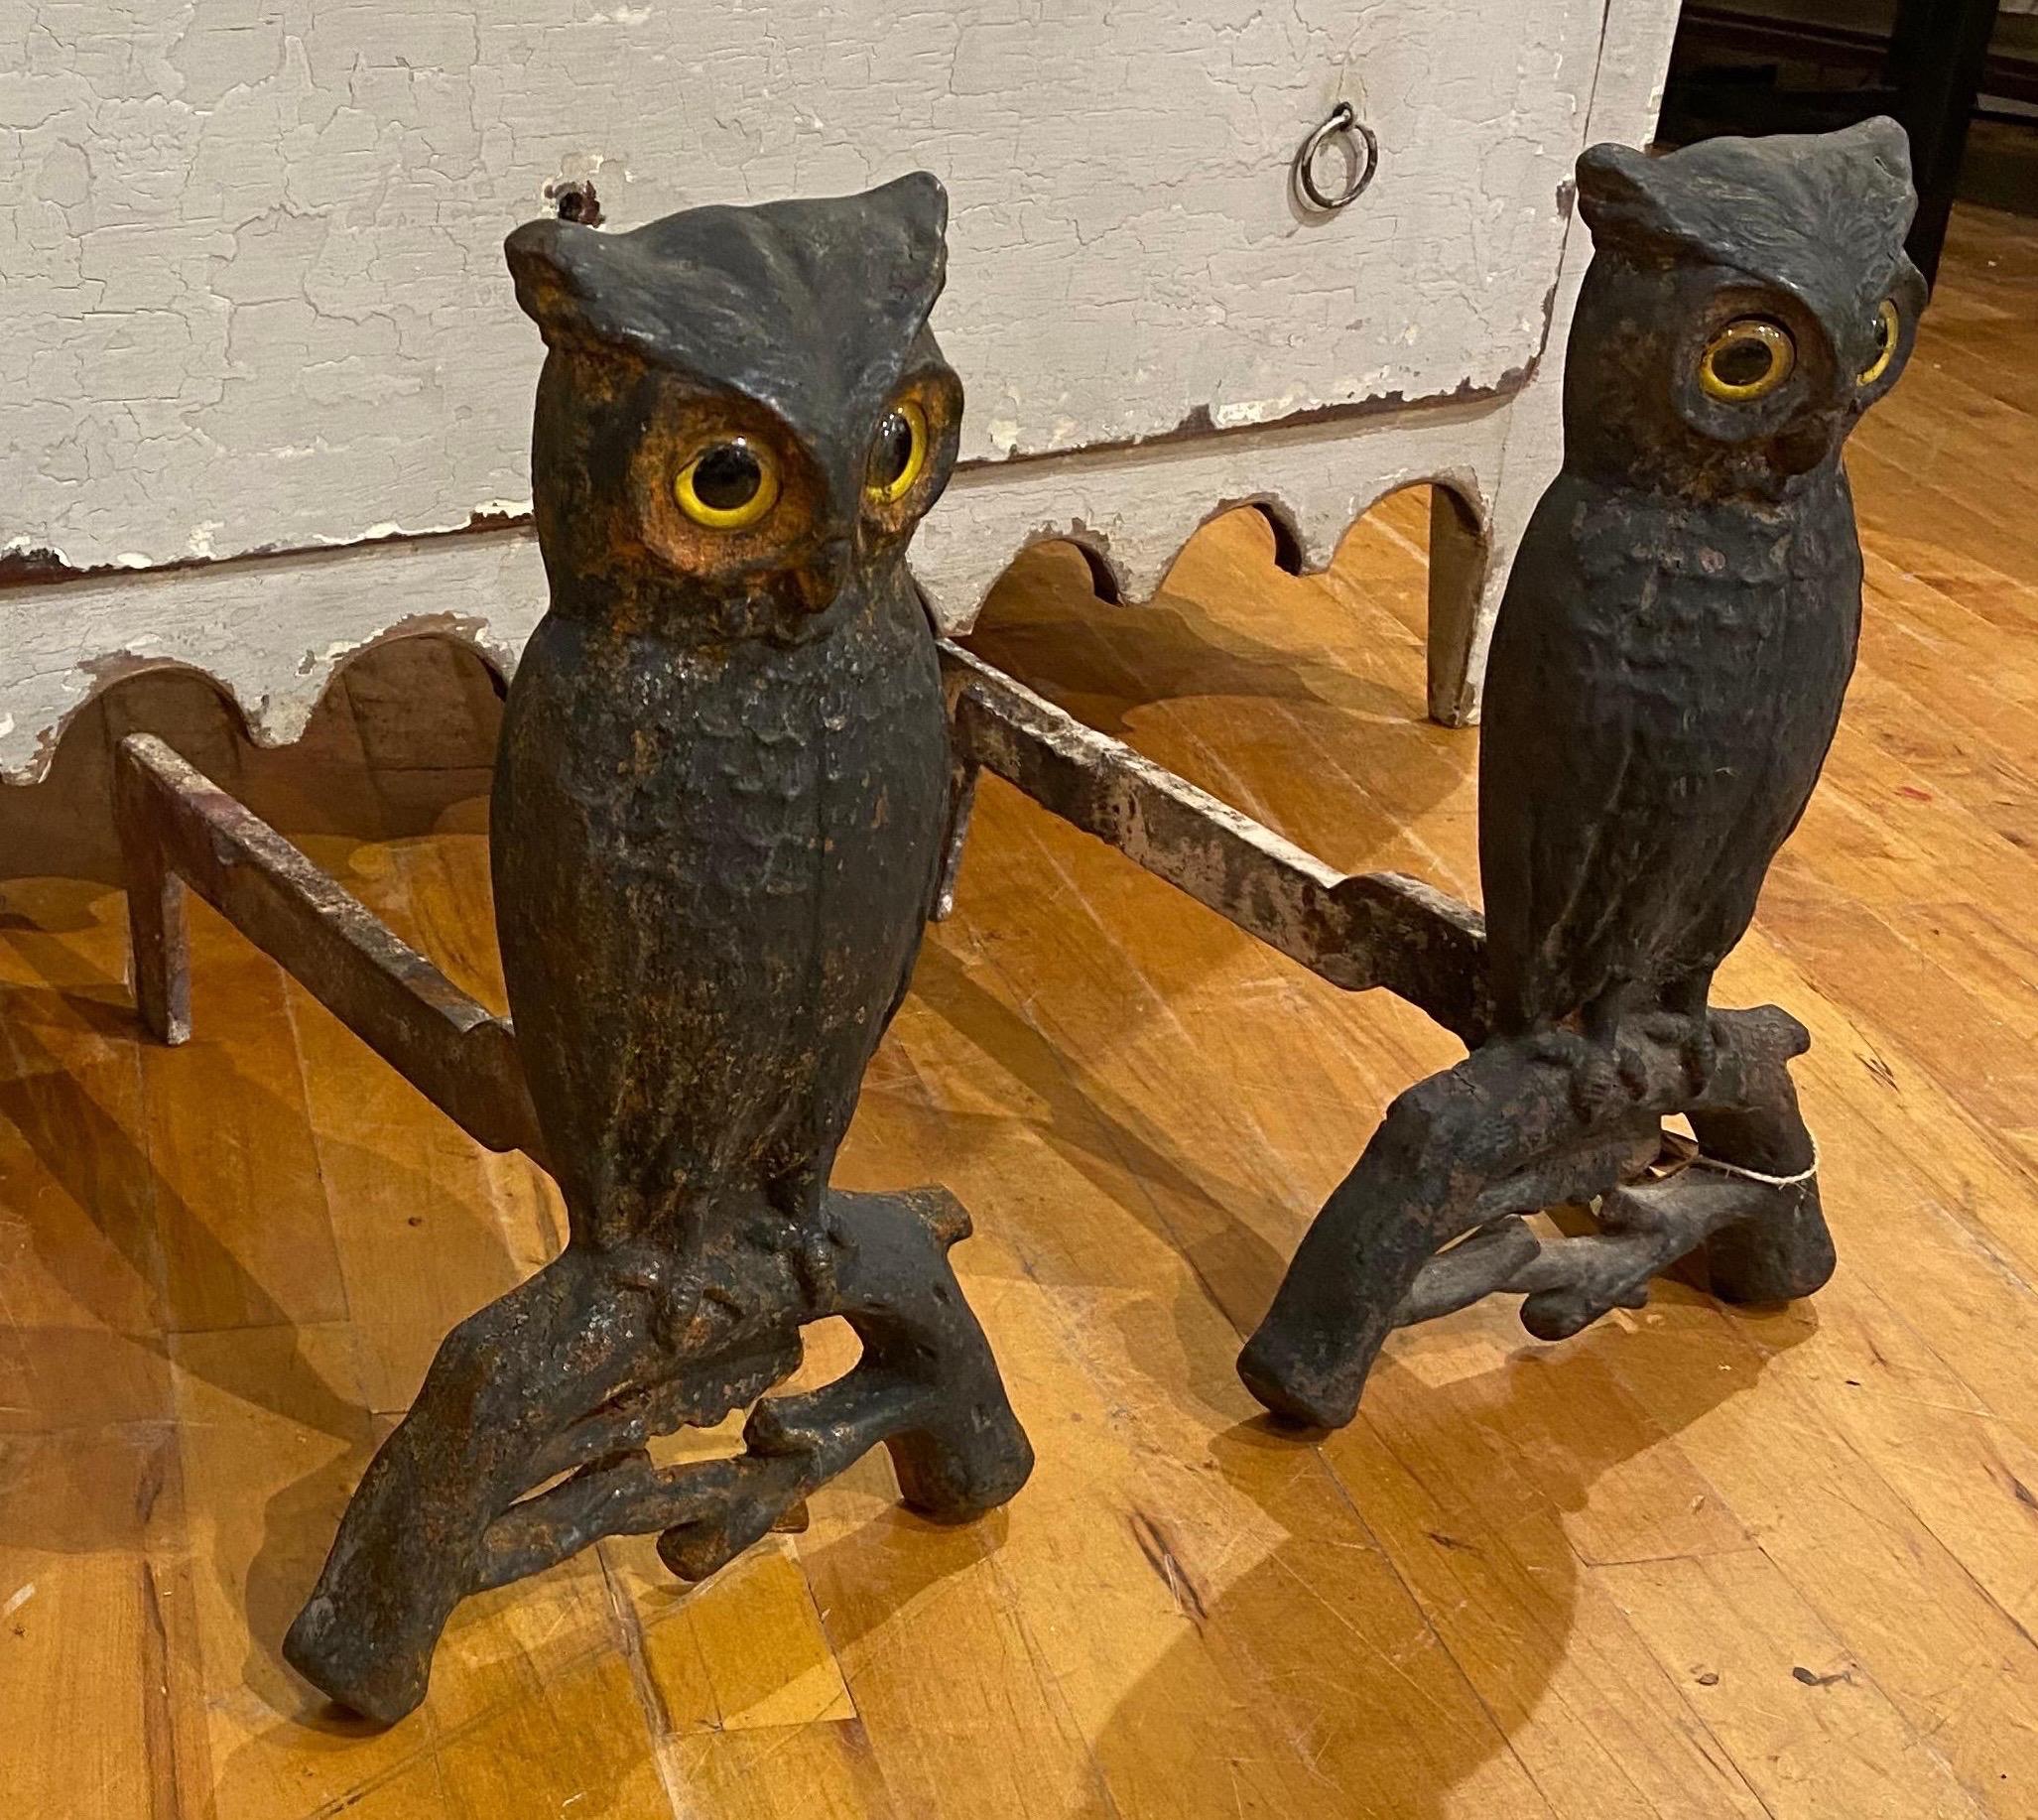 Pair of 19th century American made cast iron owl andirons with original glass eyes.